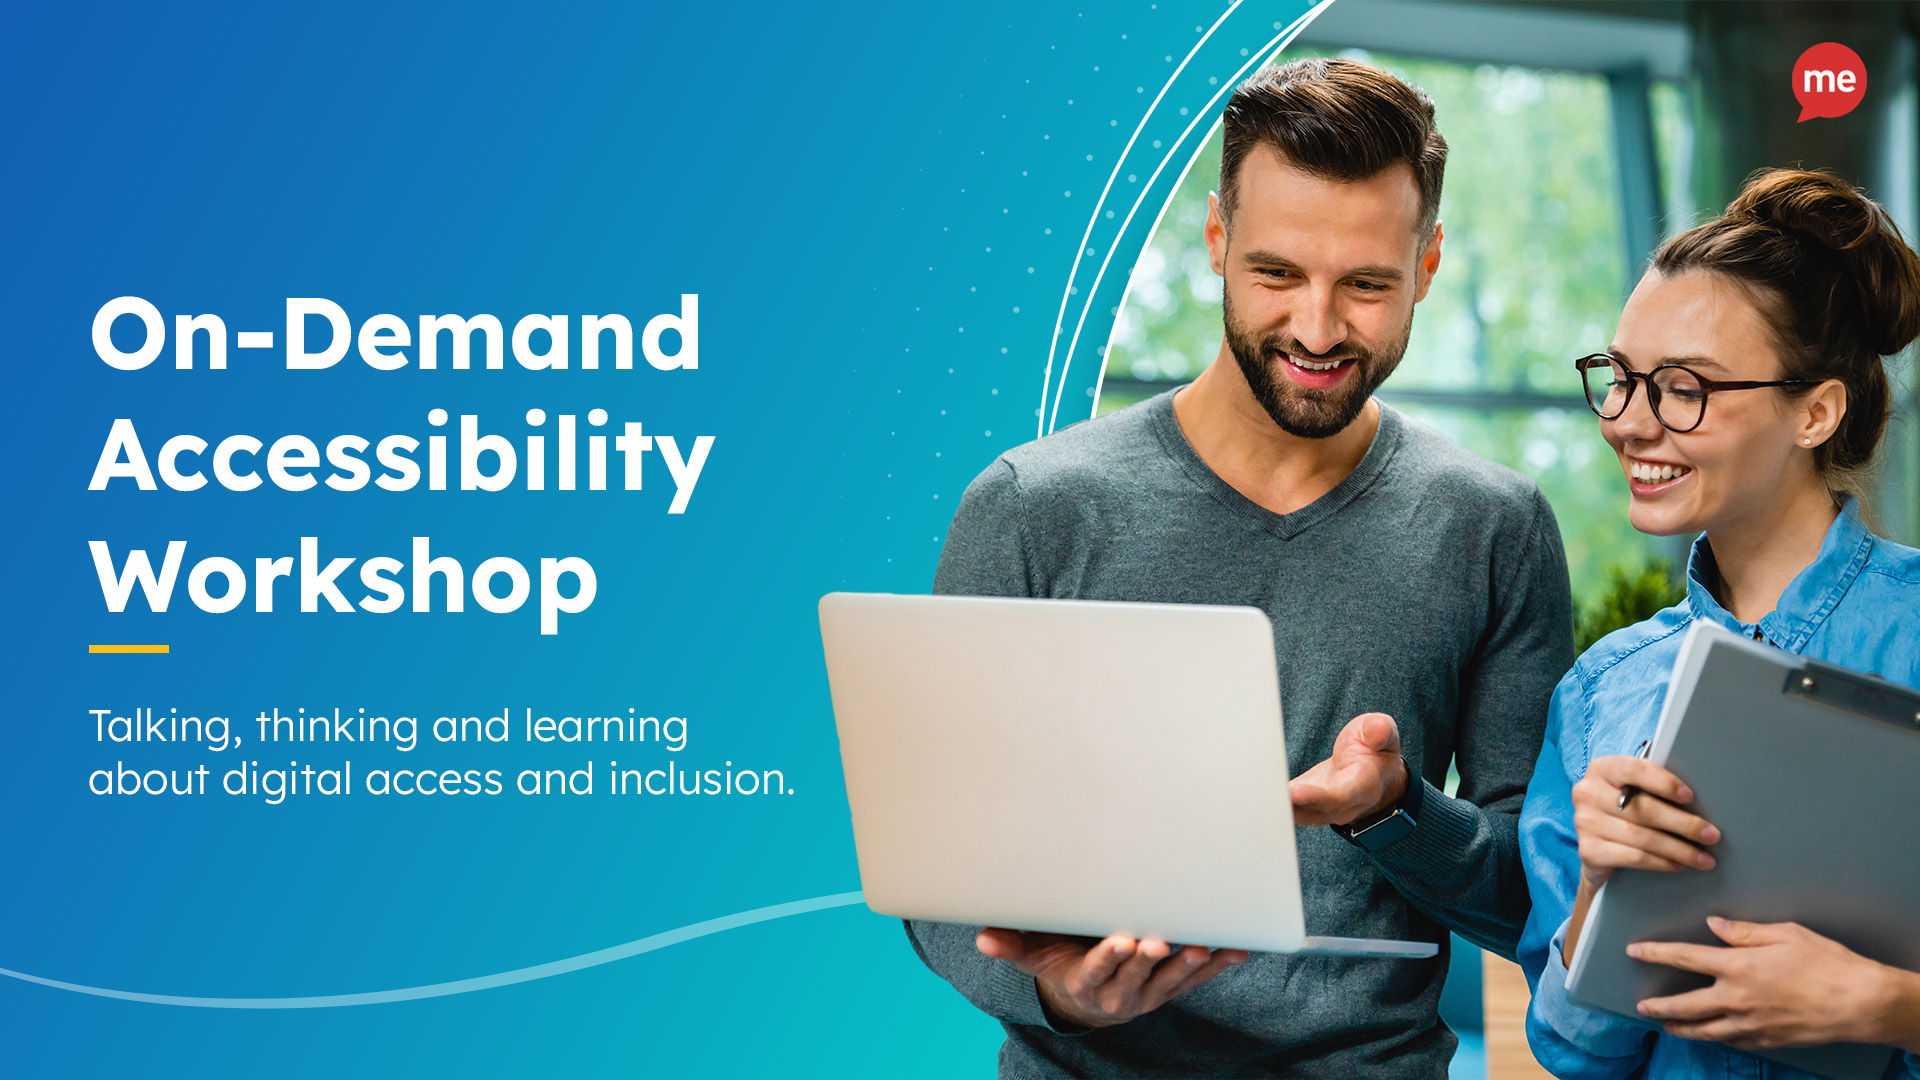 On-demand accessibility workshop